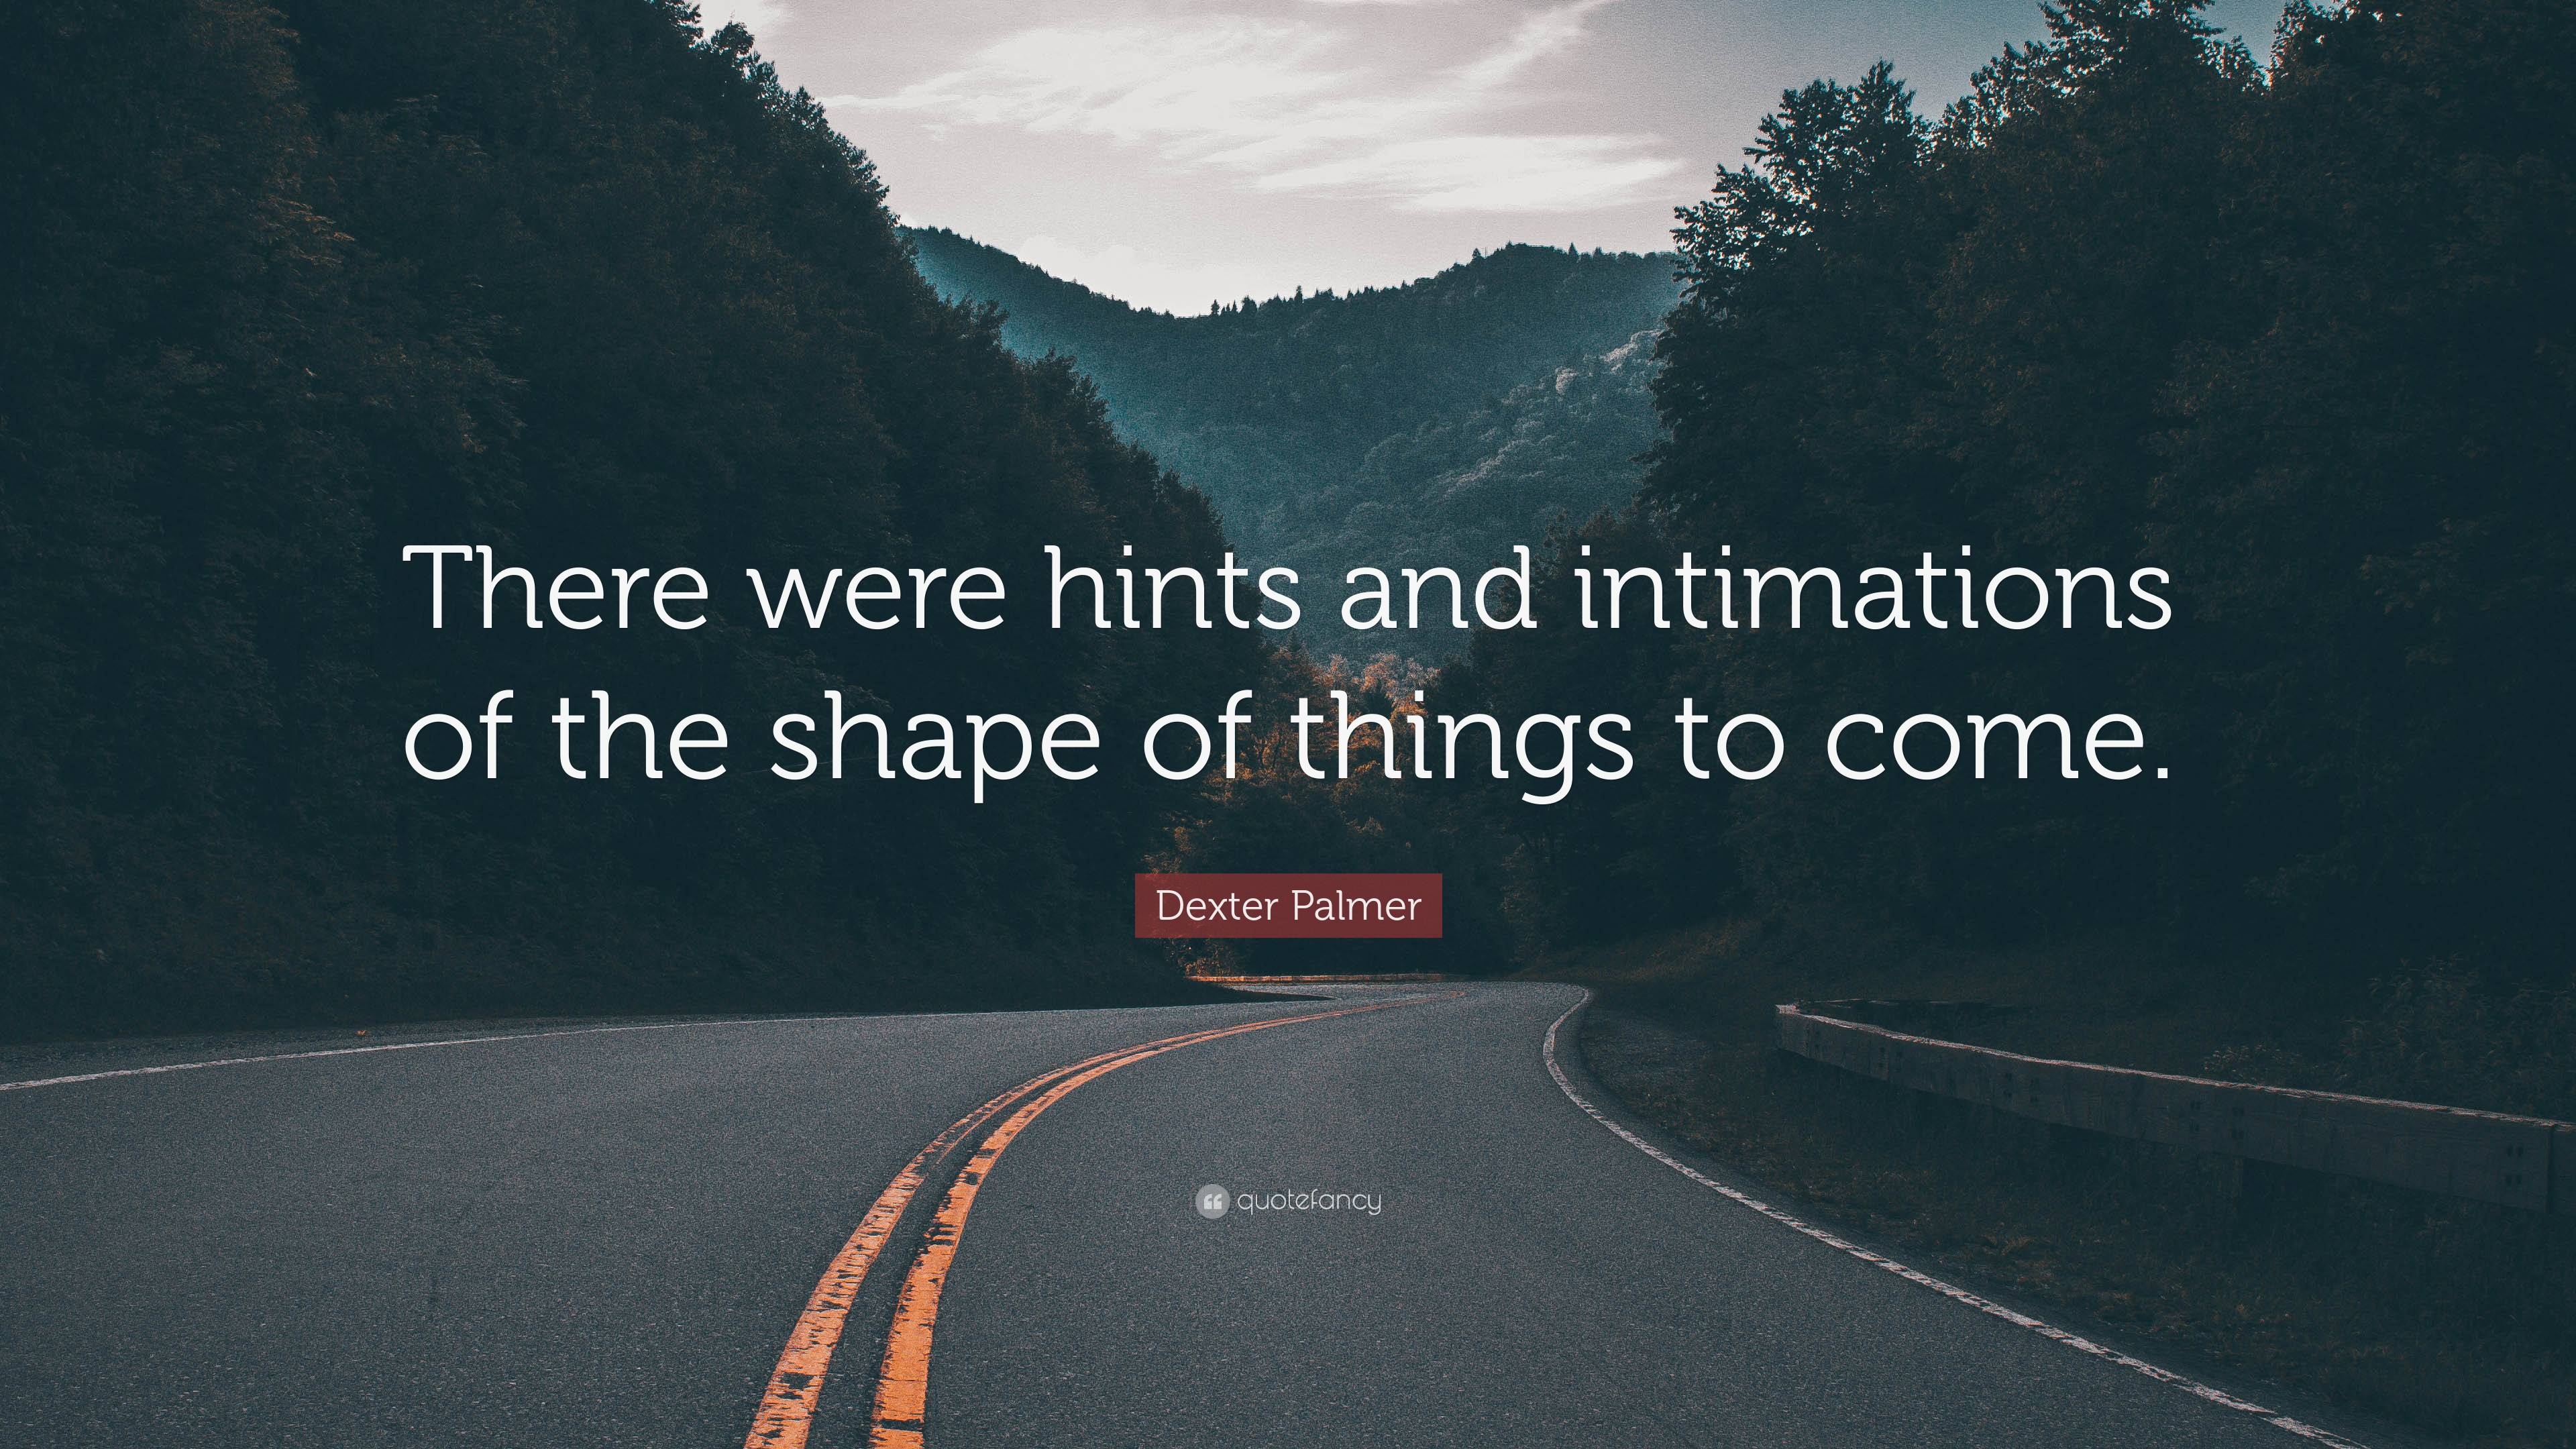 https://quotefancy.com/media/wallpaper/3840x2160/7126052-Dexter-Palmer-Quote-There-were-hints-and-intimations-of-the-shape.jpg